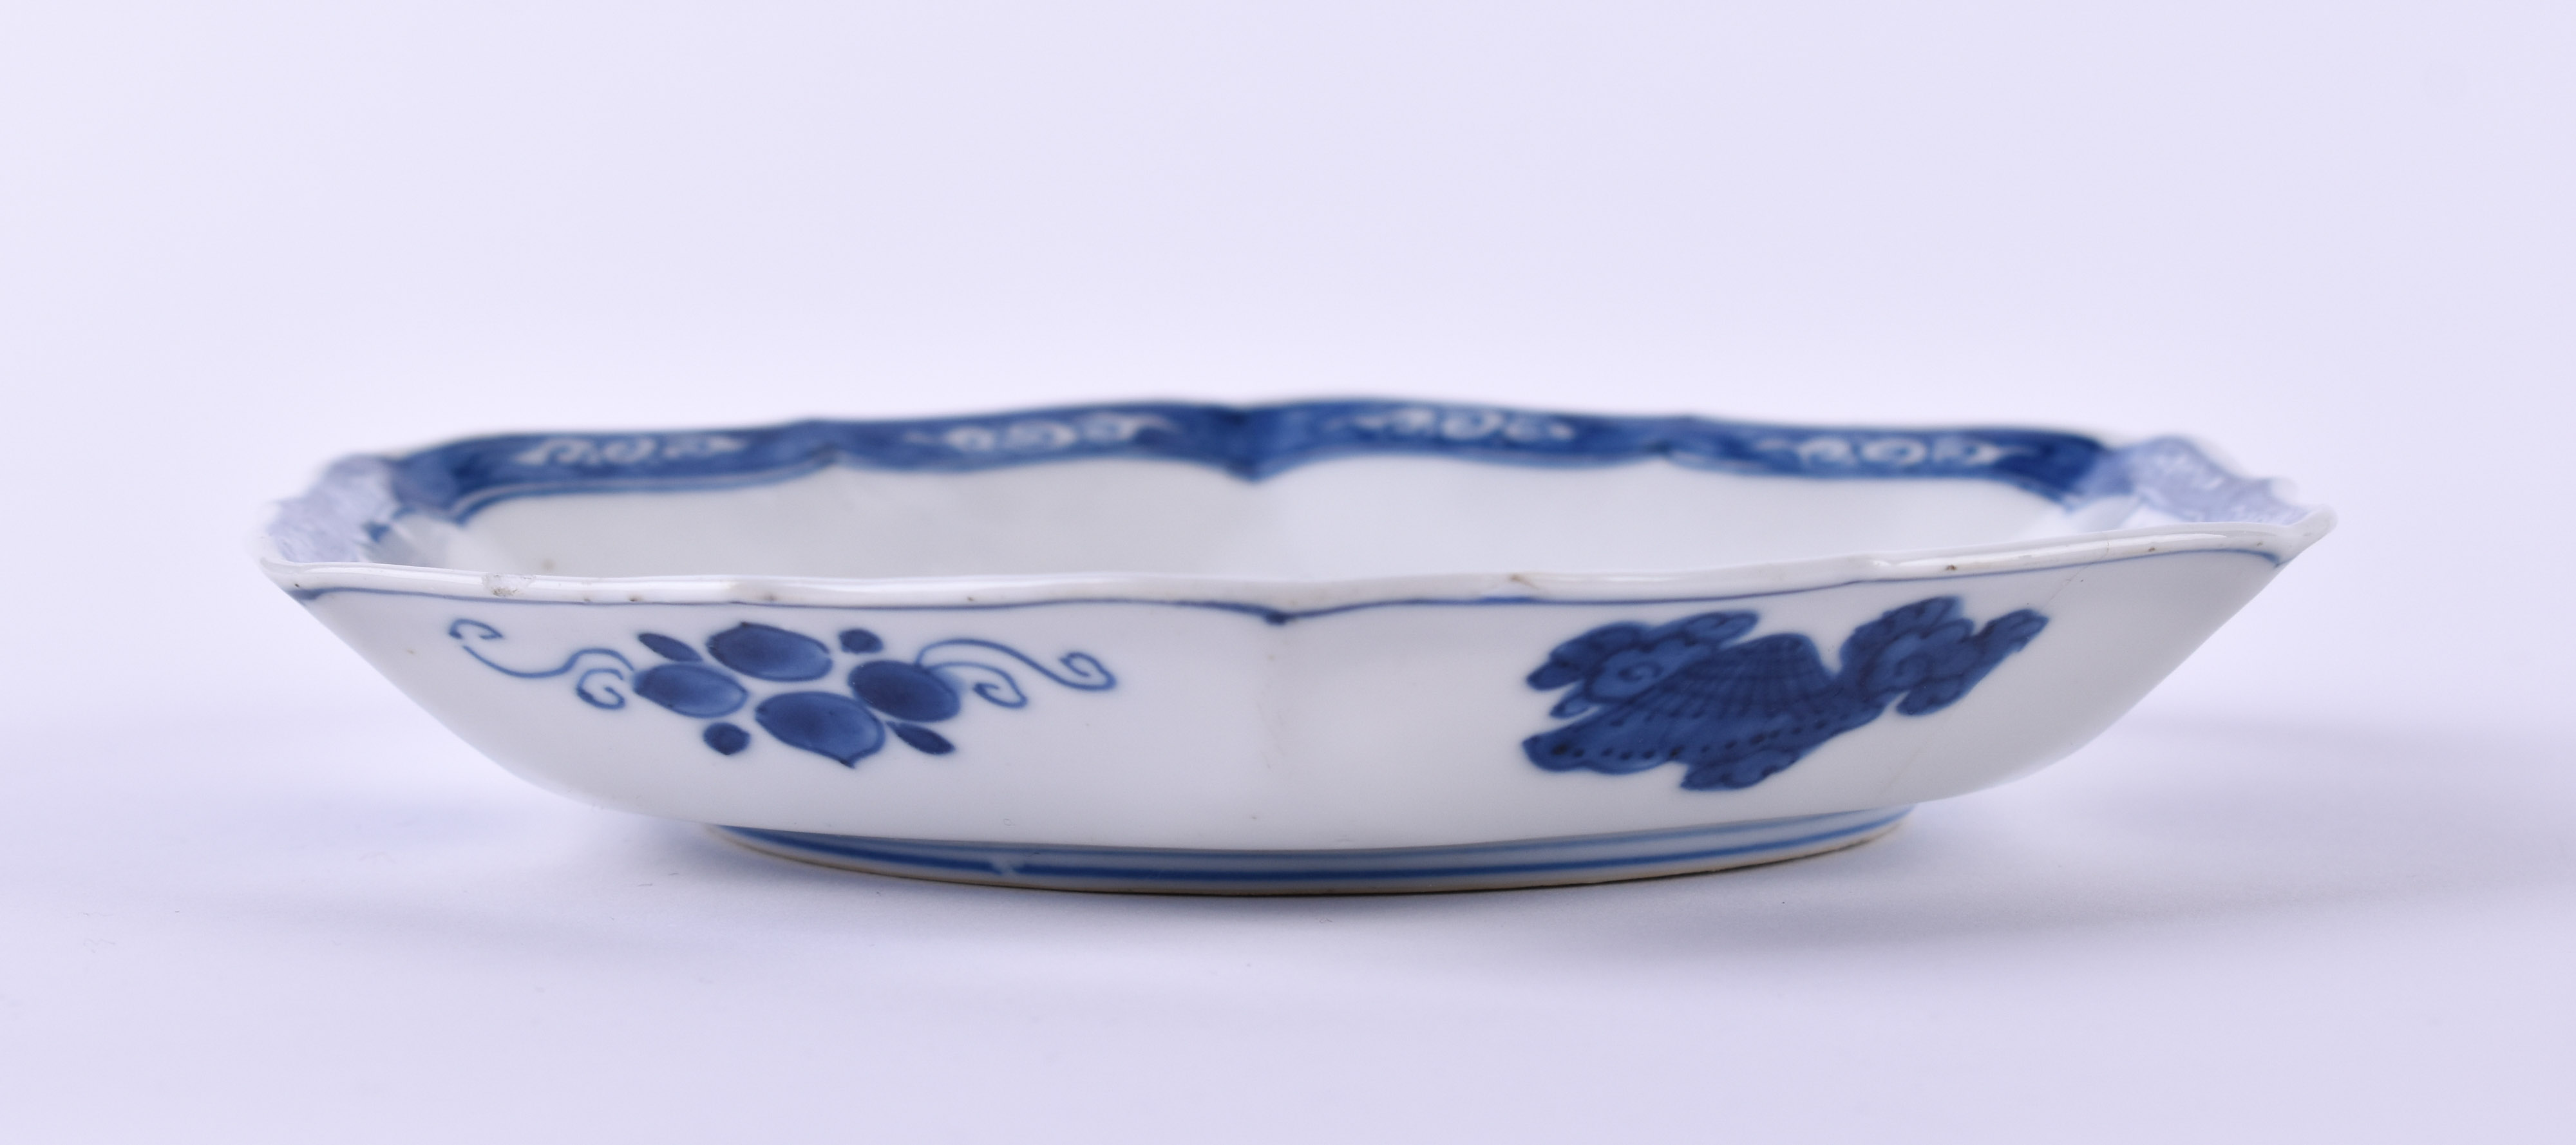  Bowl China Qing dynasty 17th / 18th century  - Image 3 of 8